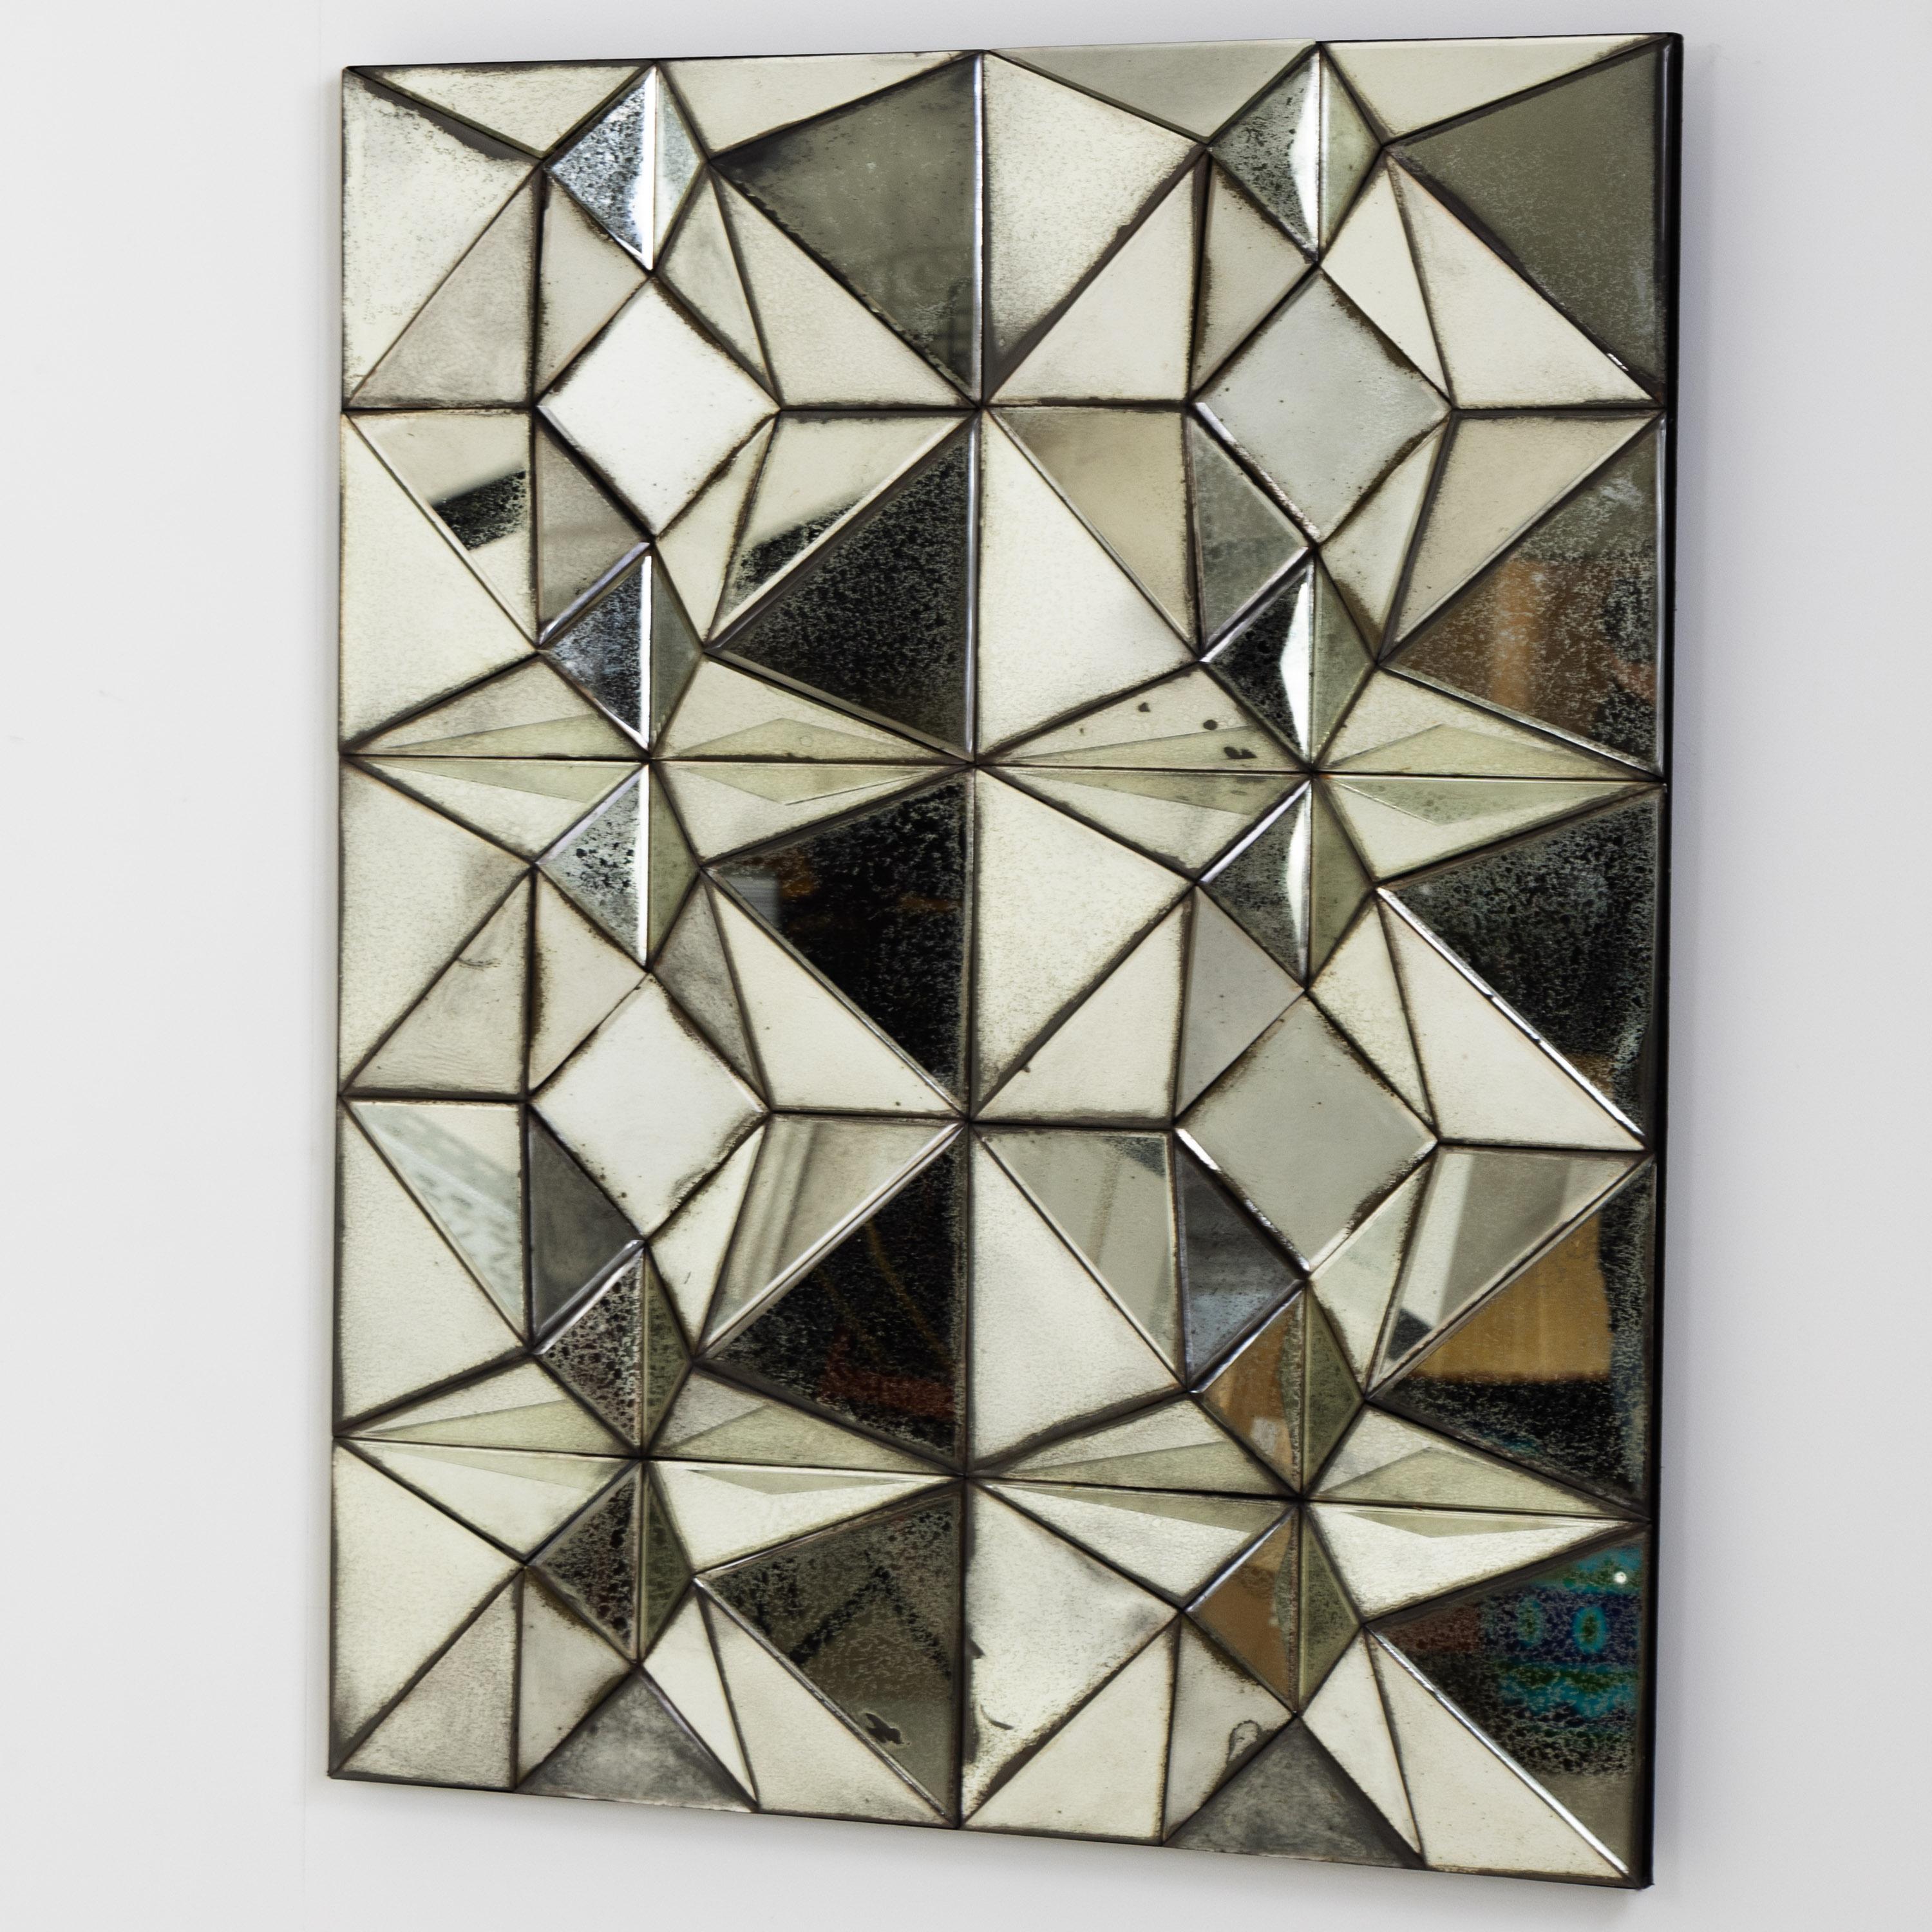 Mirror from the Ode's Design series with triangular or square discs, which are arranged into pyramids, creating a concave-convex mirror surface. Inscribed, signed and numbered on the reverse.